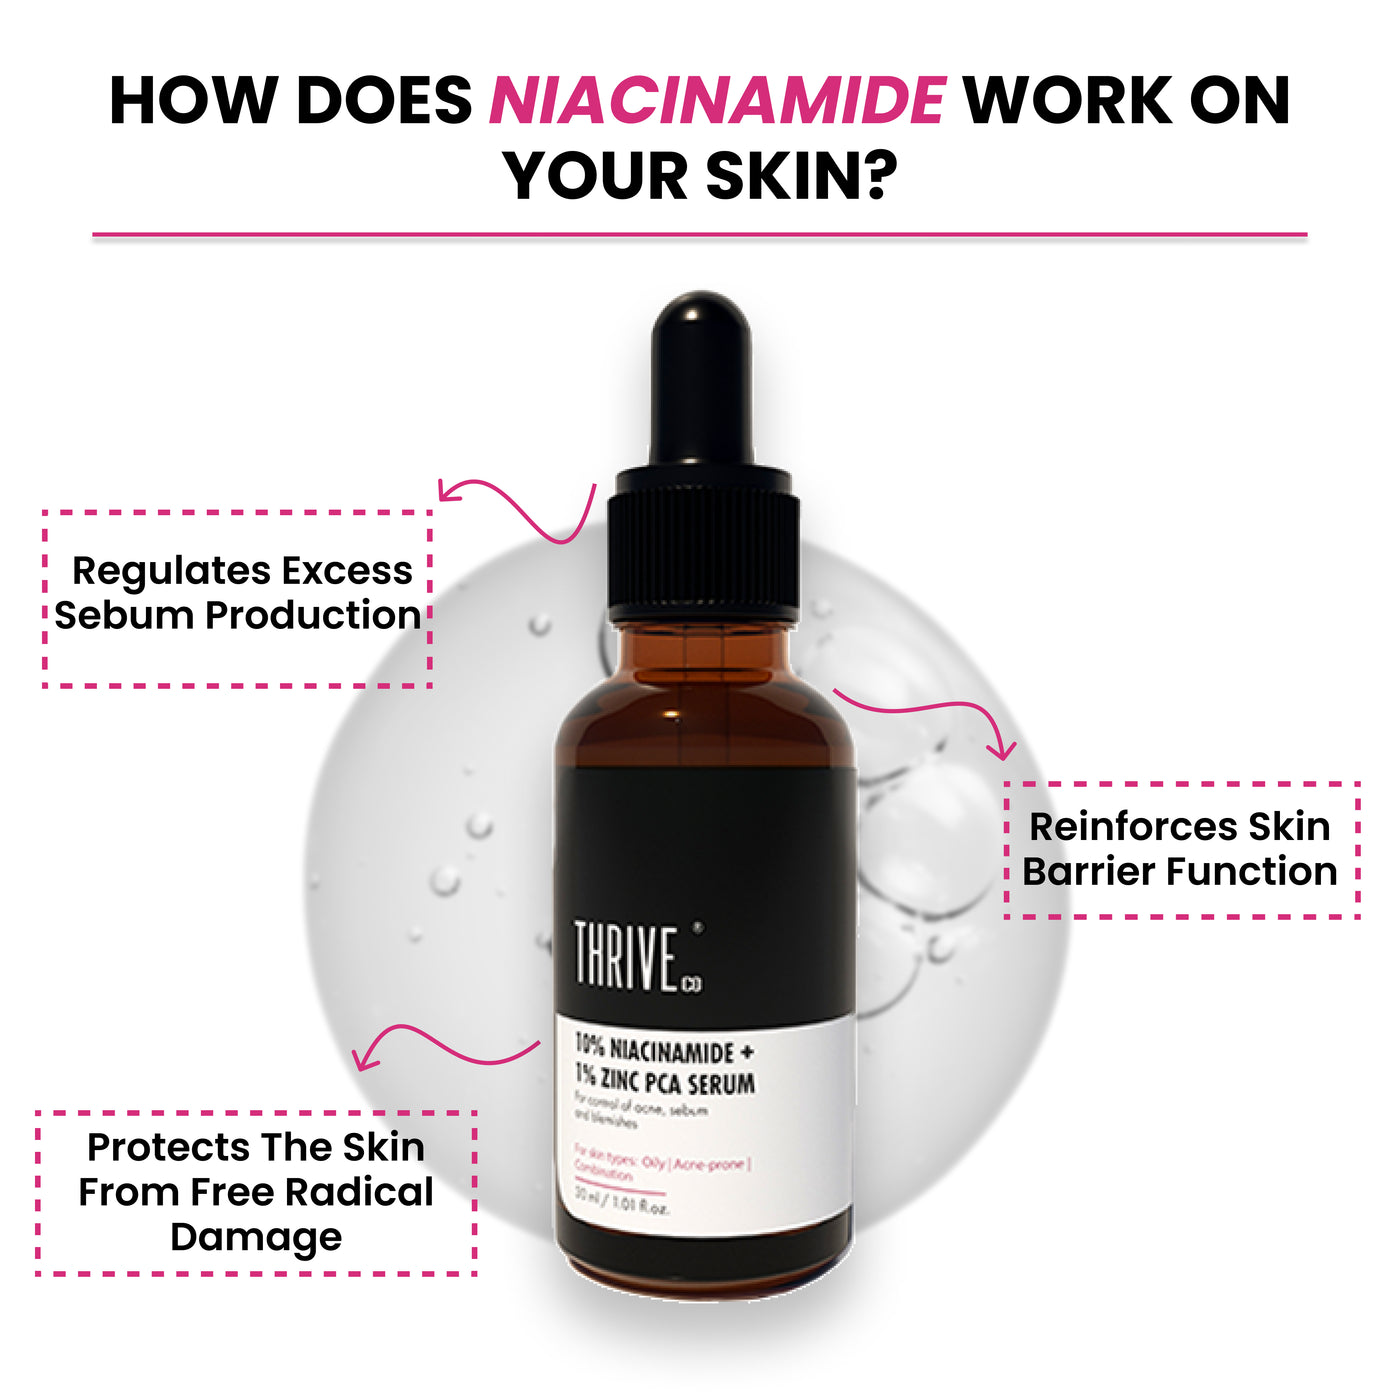 Thriveco 10% Niacinamide + 1% Zinc Pca Serum | Helps in reduction of acne, sebum and blemishes | Skin Type Oily, acne prone and Combination | Men & Women | Vegan & cruelty-free | 30ml